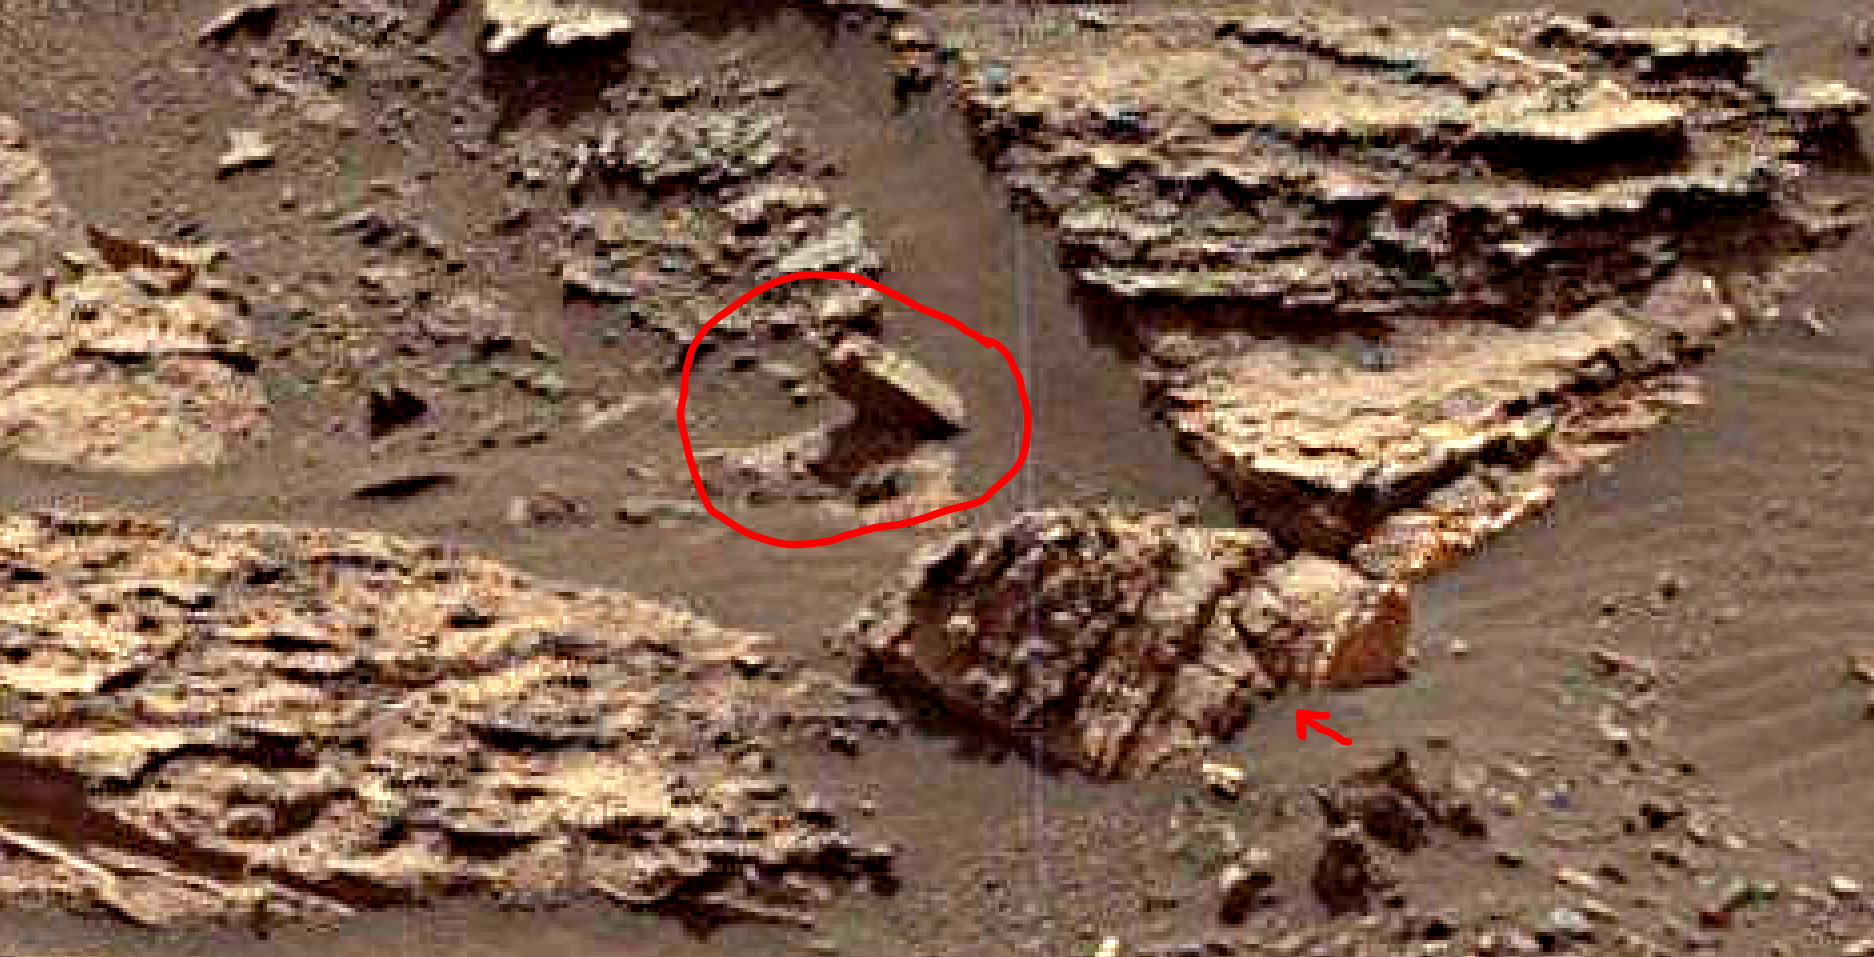 mars-sol-1485-anomaly-artifacts-13-was-life-on-mars